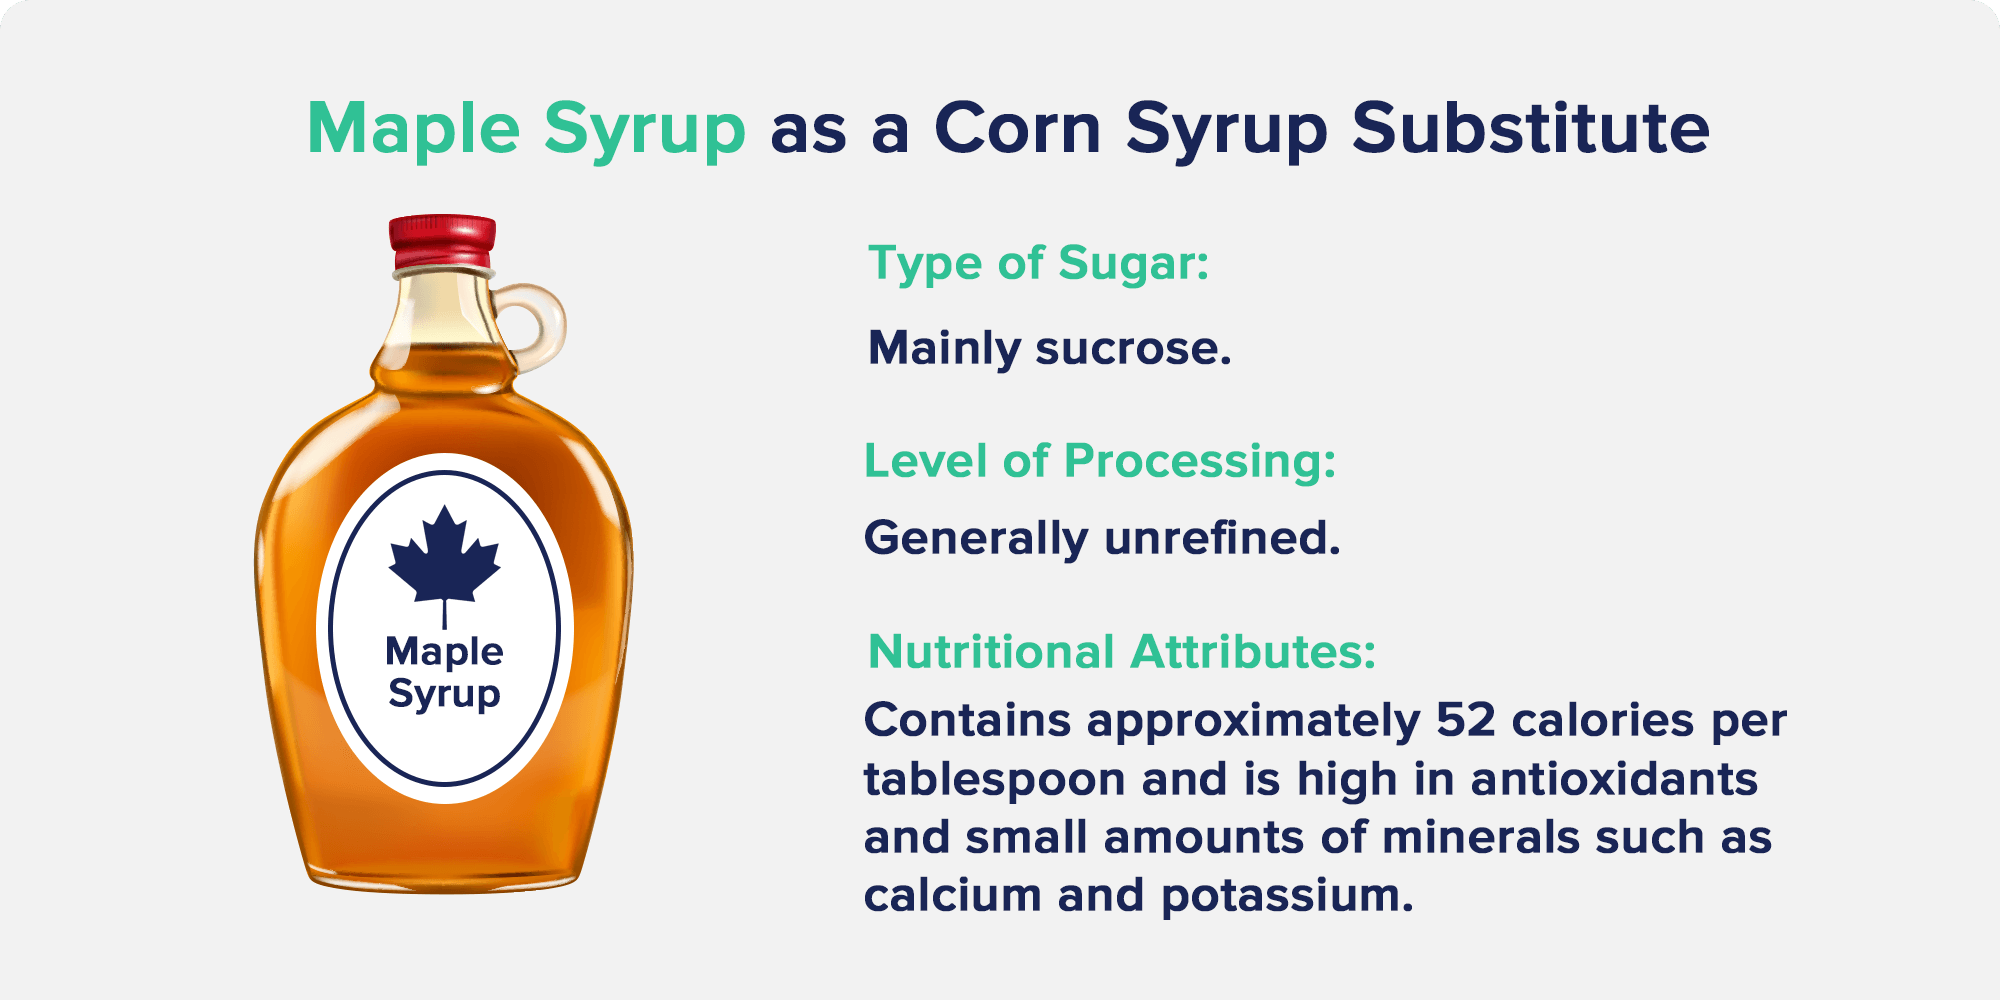 Maple Syrup as a Corn Syrup Substitute